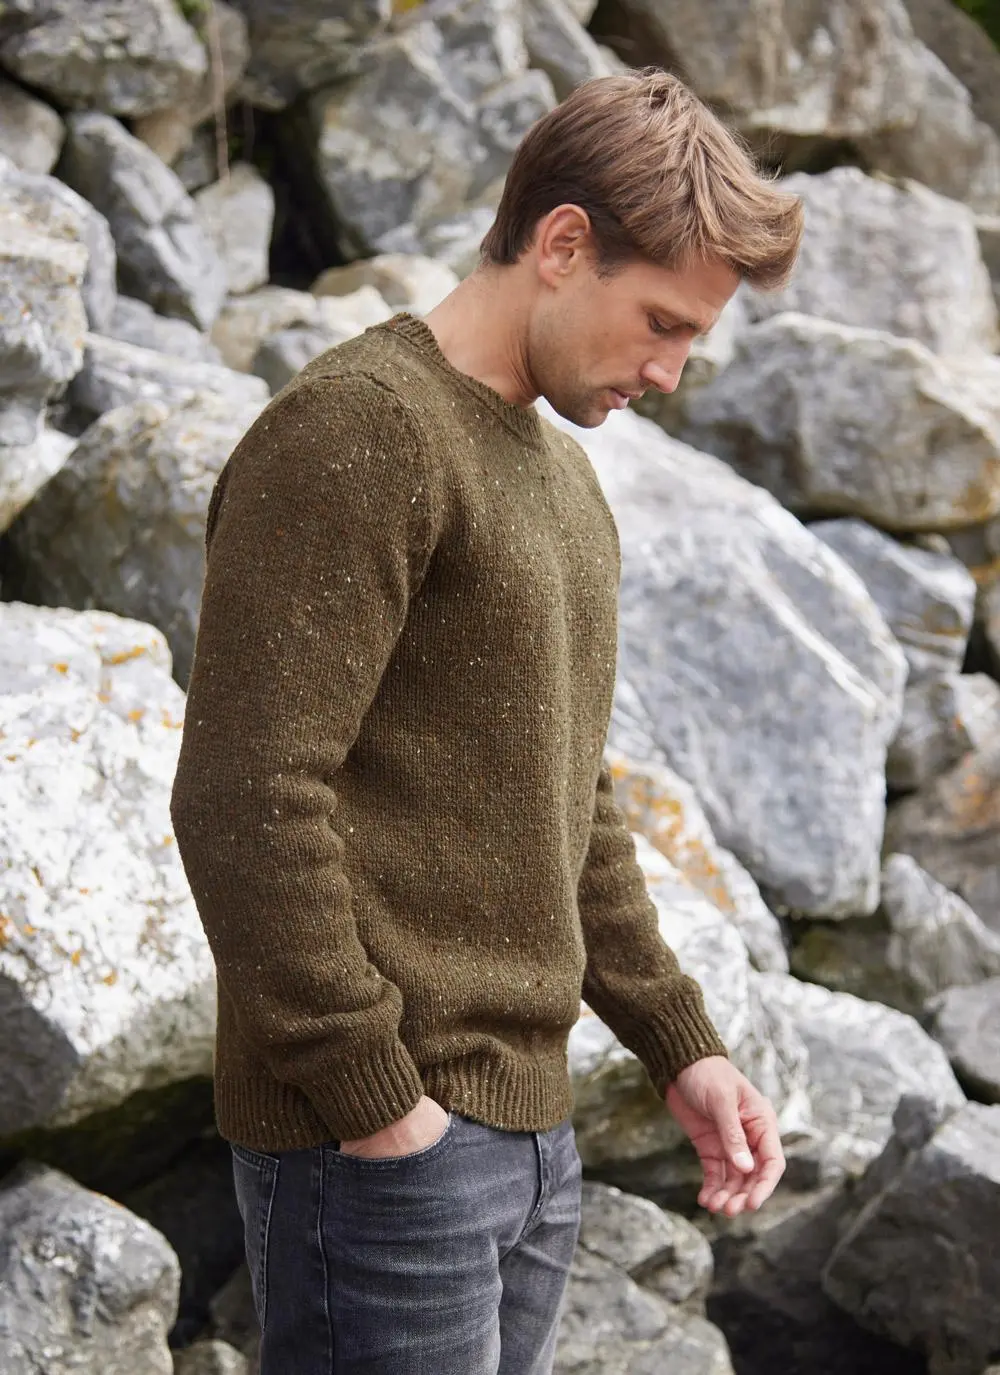 Man on a beach wearing an olive flecked fisherman crew neck sweater